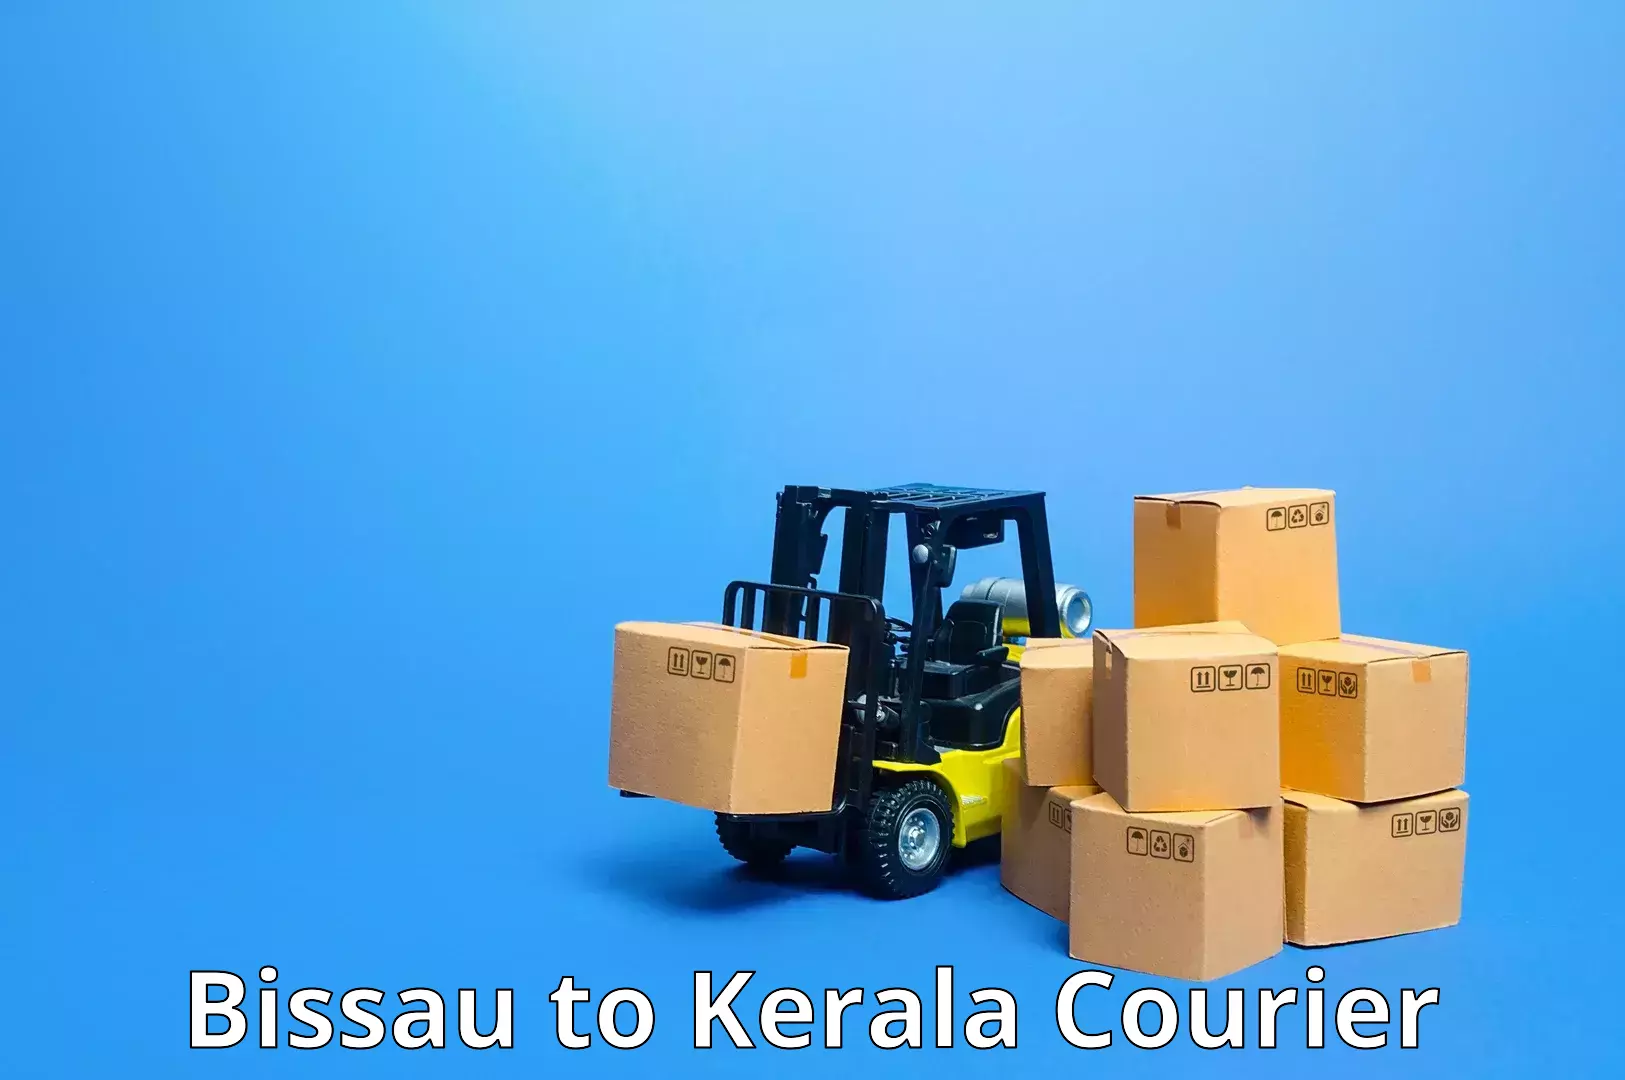 User-friendly courier app Bissau to Kerala